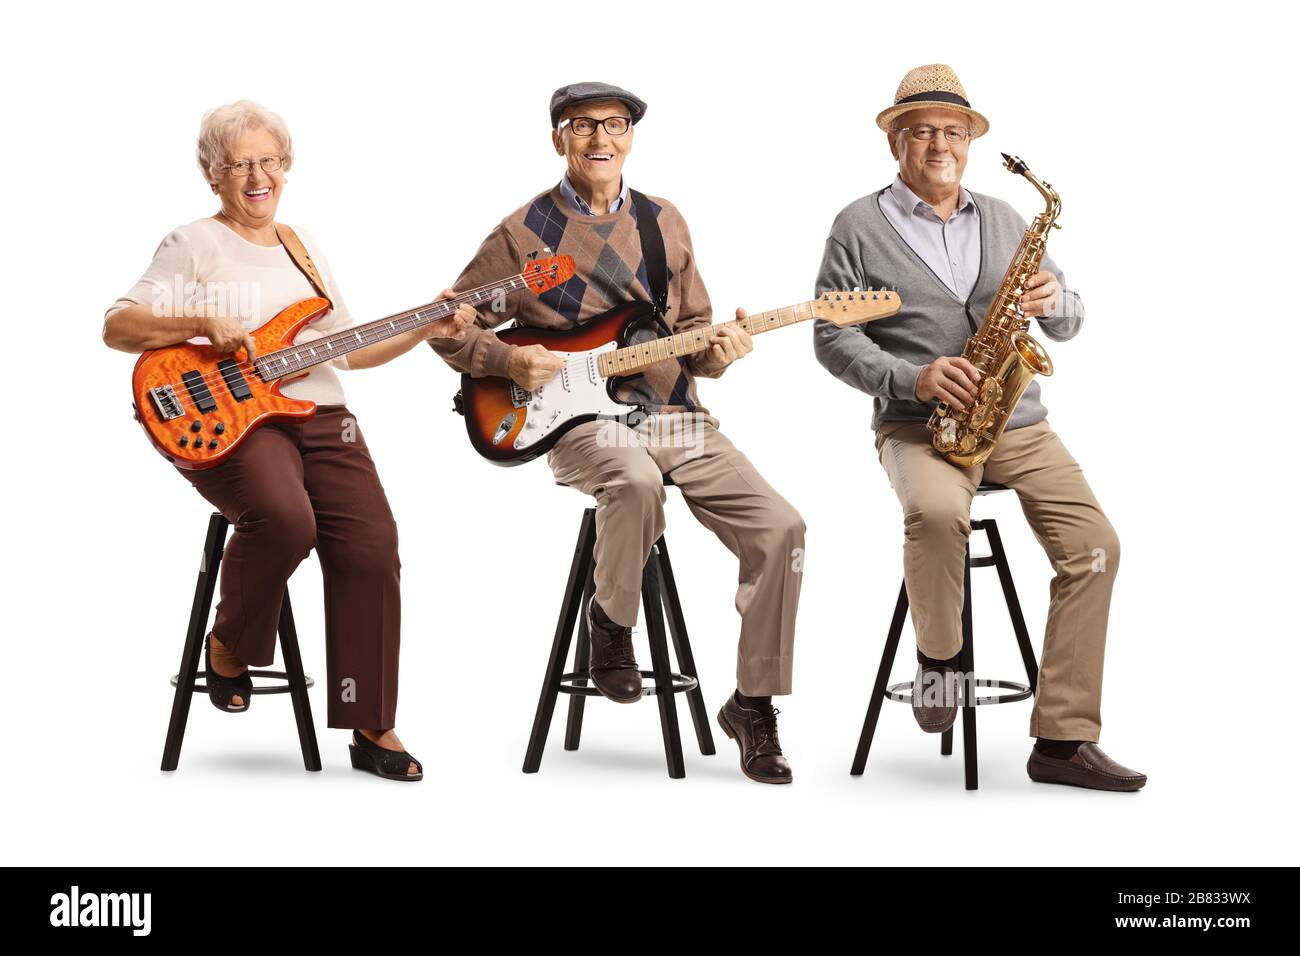 Elderly people sitting and playing musical instruments isolated on white background Stock Photo